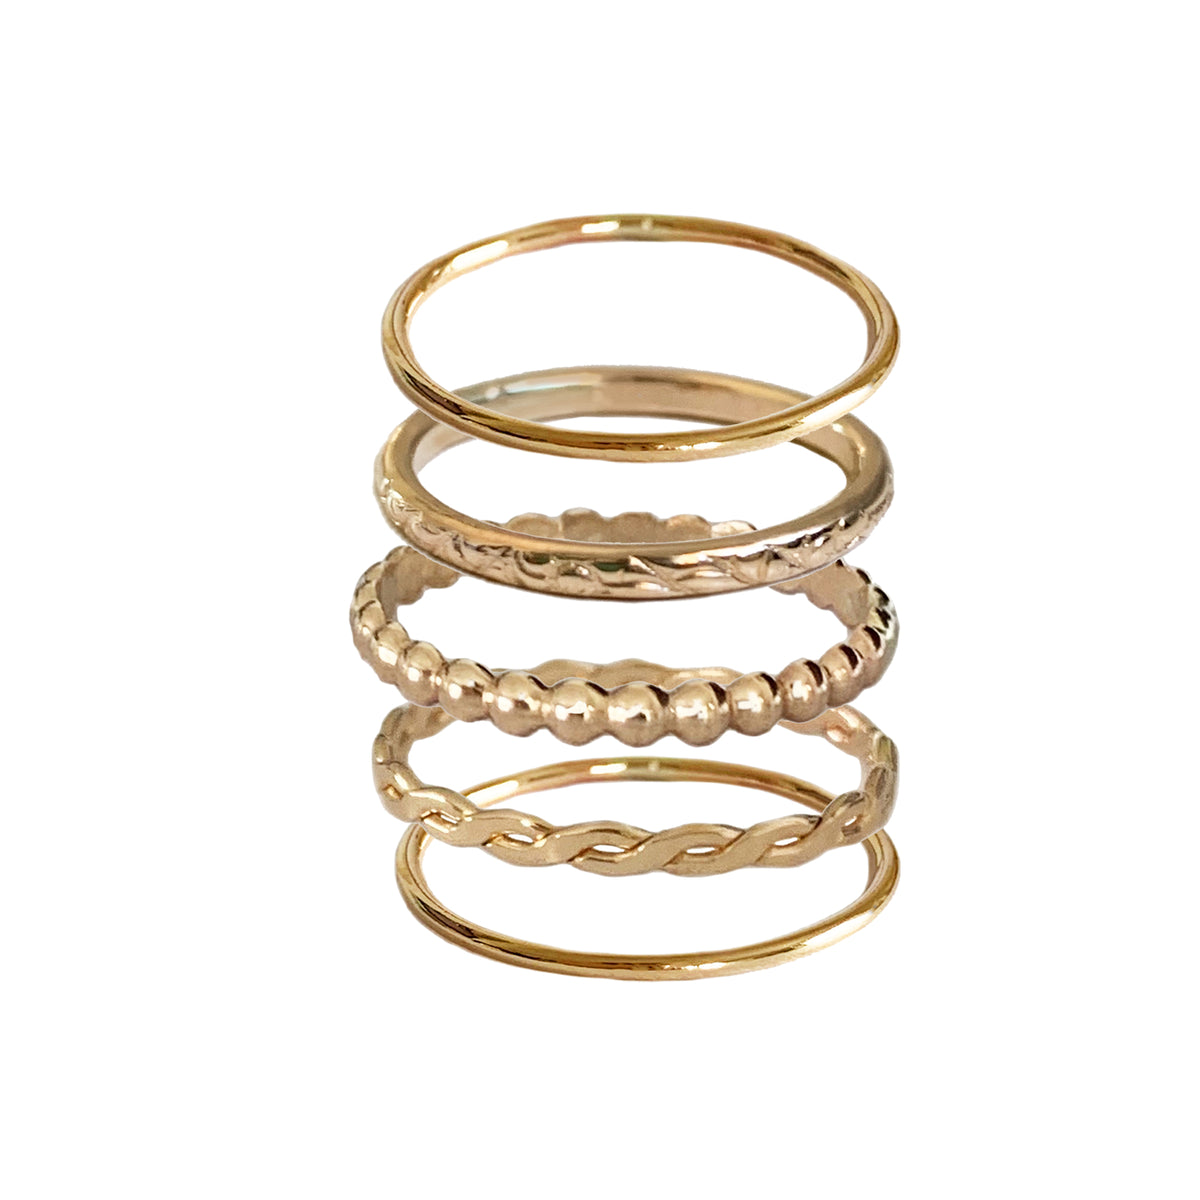 Five Toe Rings Variety Stack - NEW!